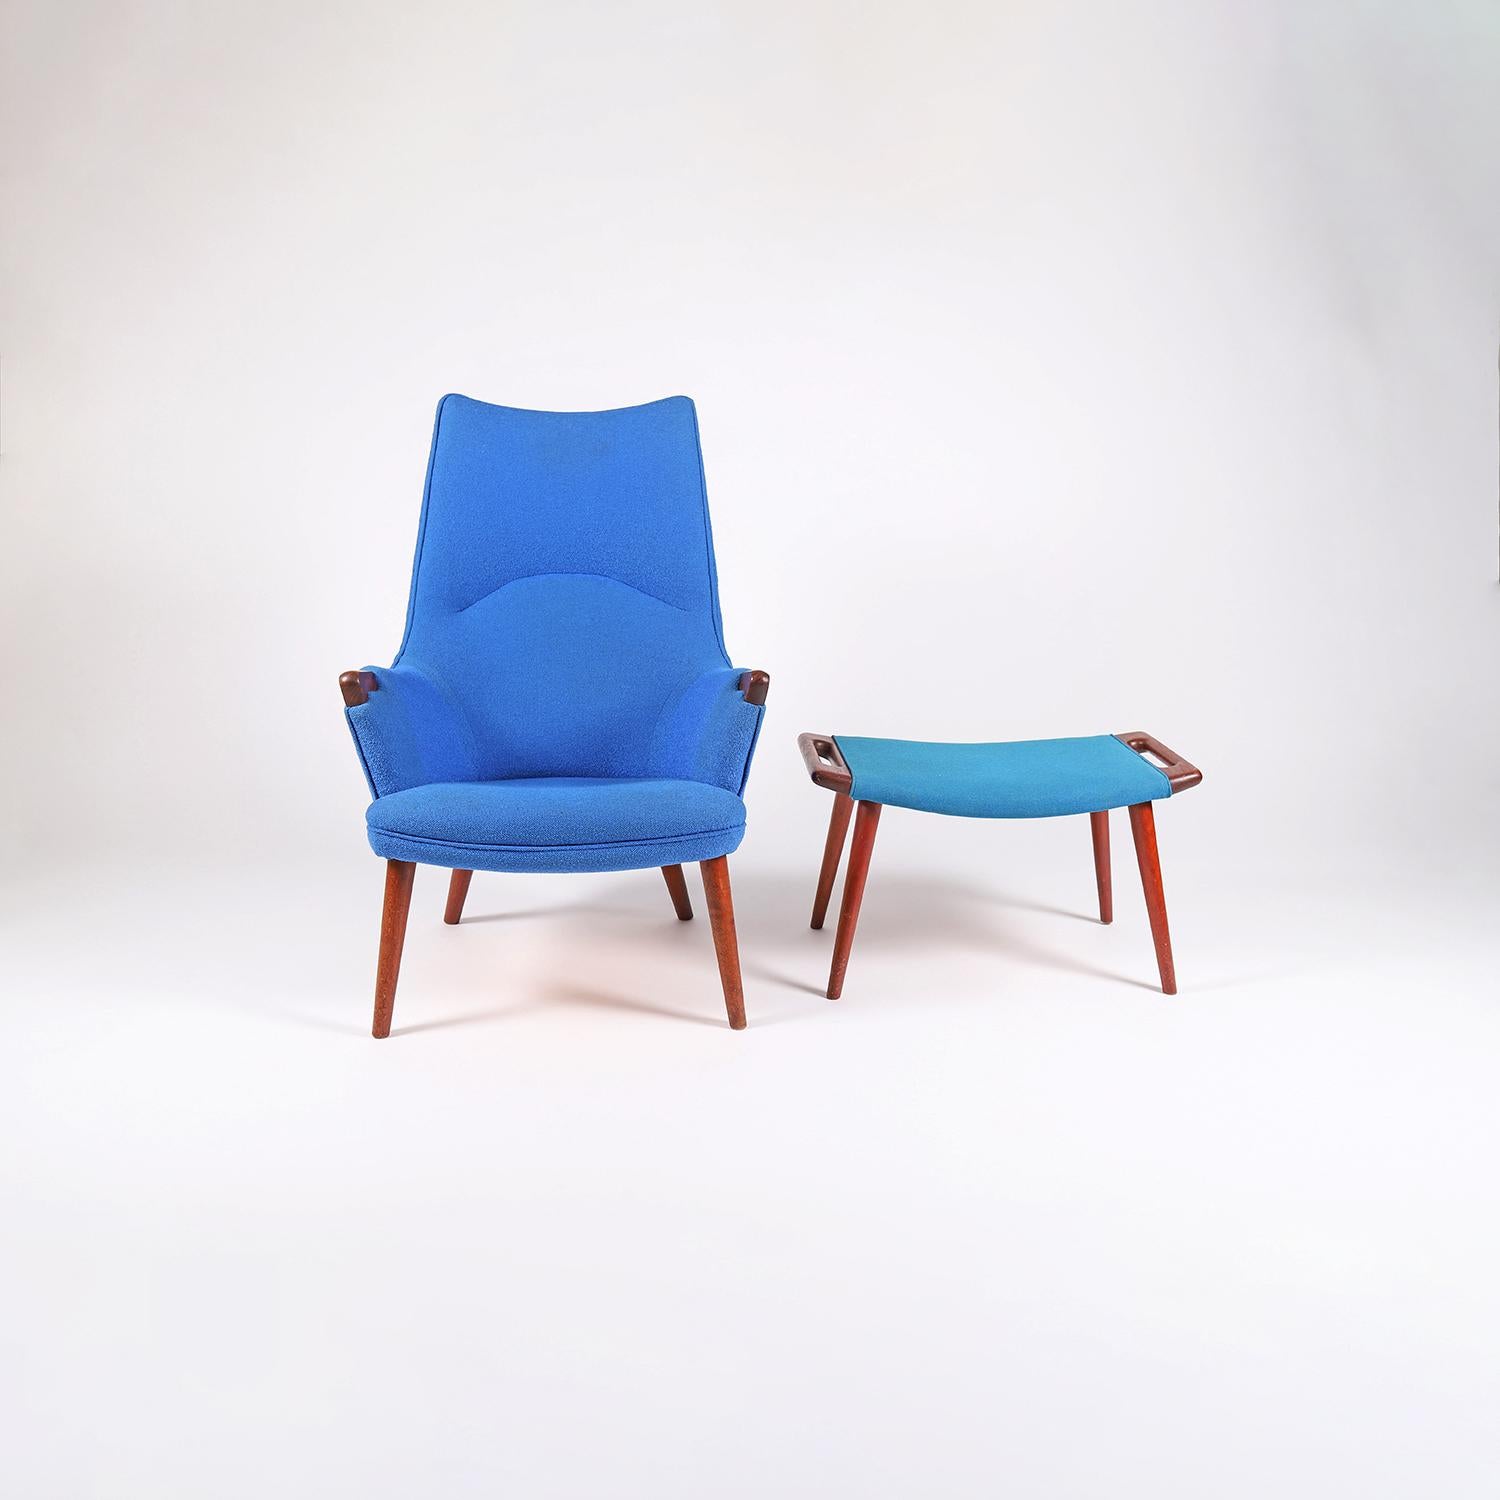 A rare variant Hans J. Wegner designed high back AP27 lounge and AP29 ottoman. Smaller teak hand rest with teak legs on both the lounge and ottoman. Upholstery is in vintage usable condition, please note that the blue wools on the ottoman vs the